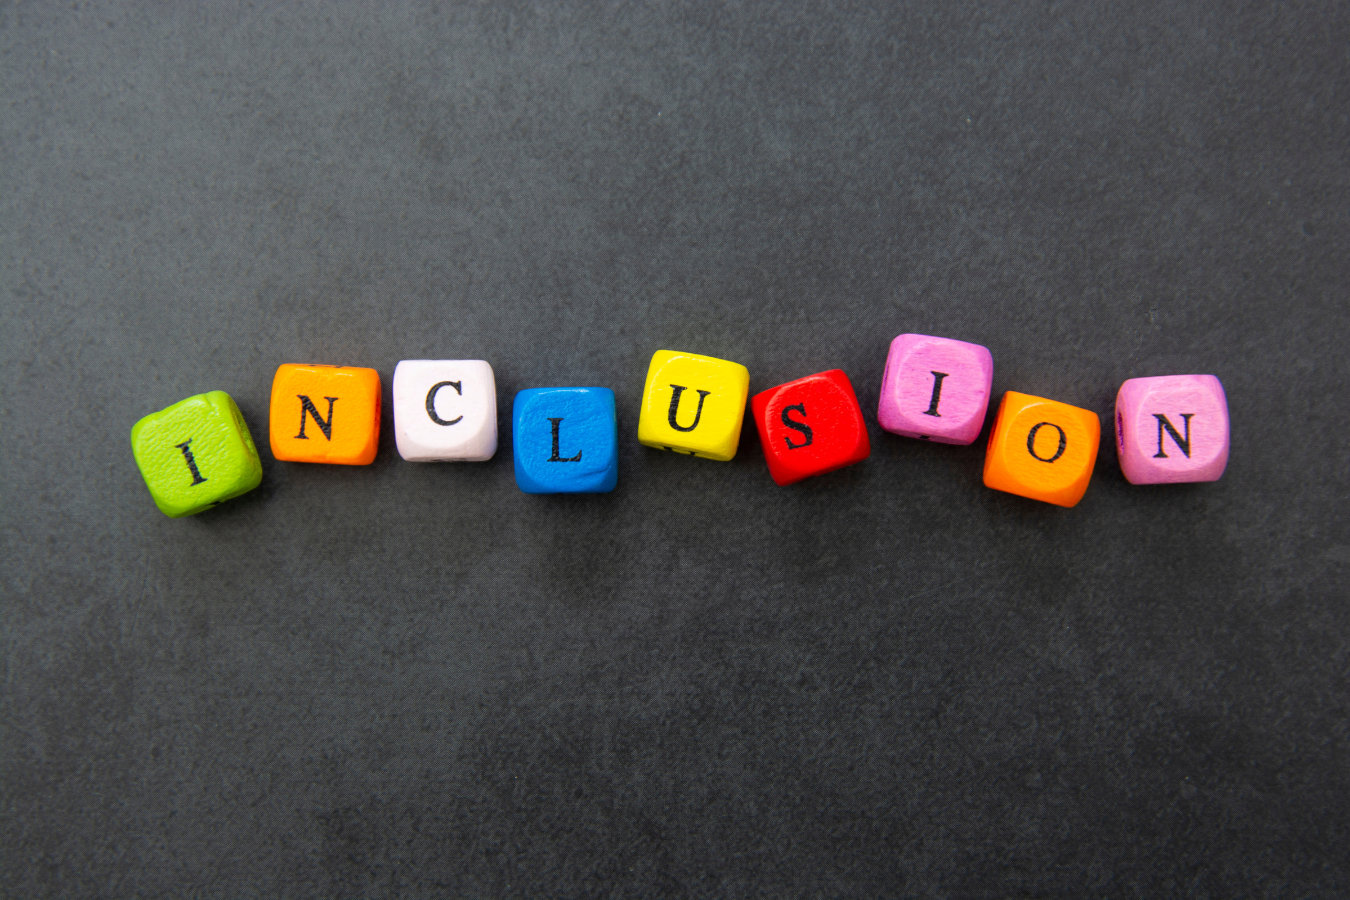 Inclusion spelled out in blocks: tips for creating an inclusive work environment.